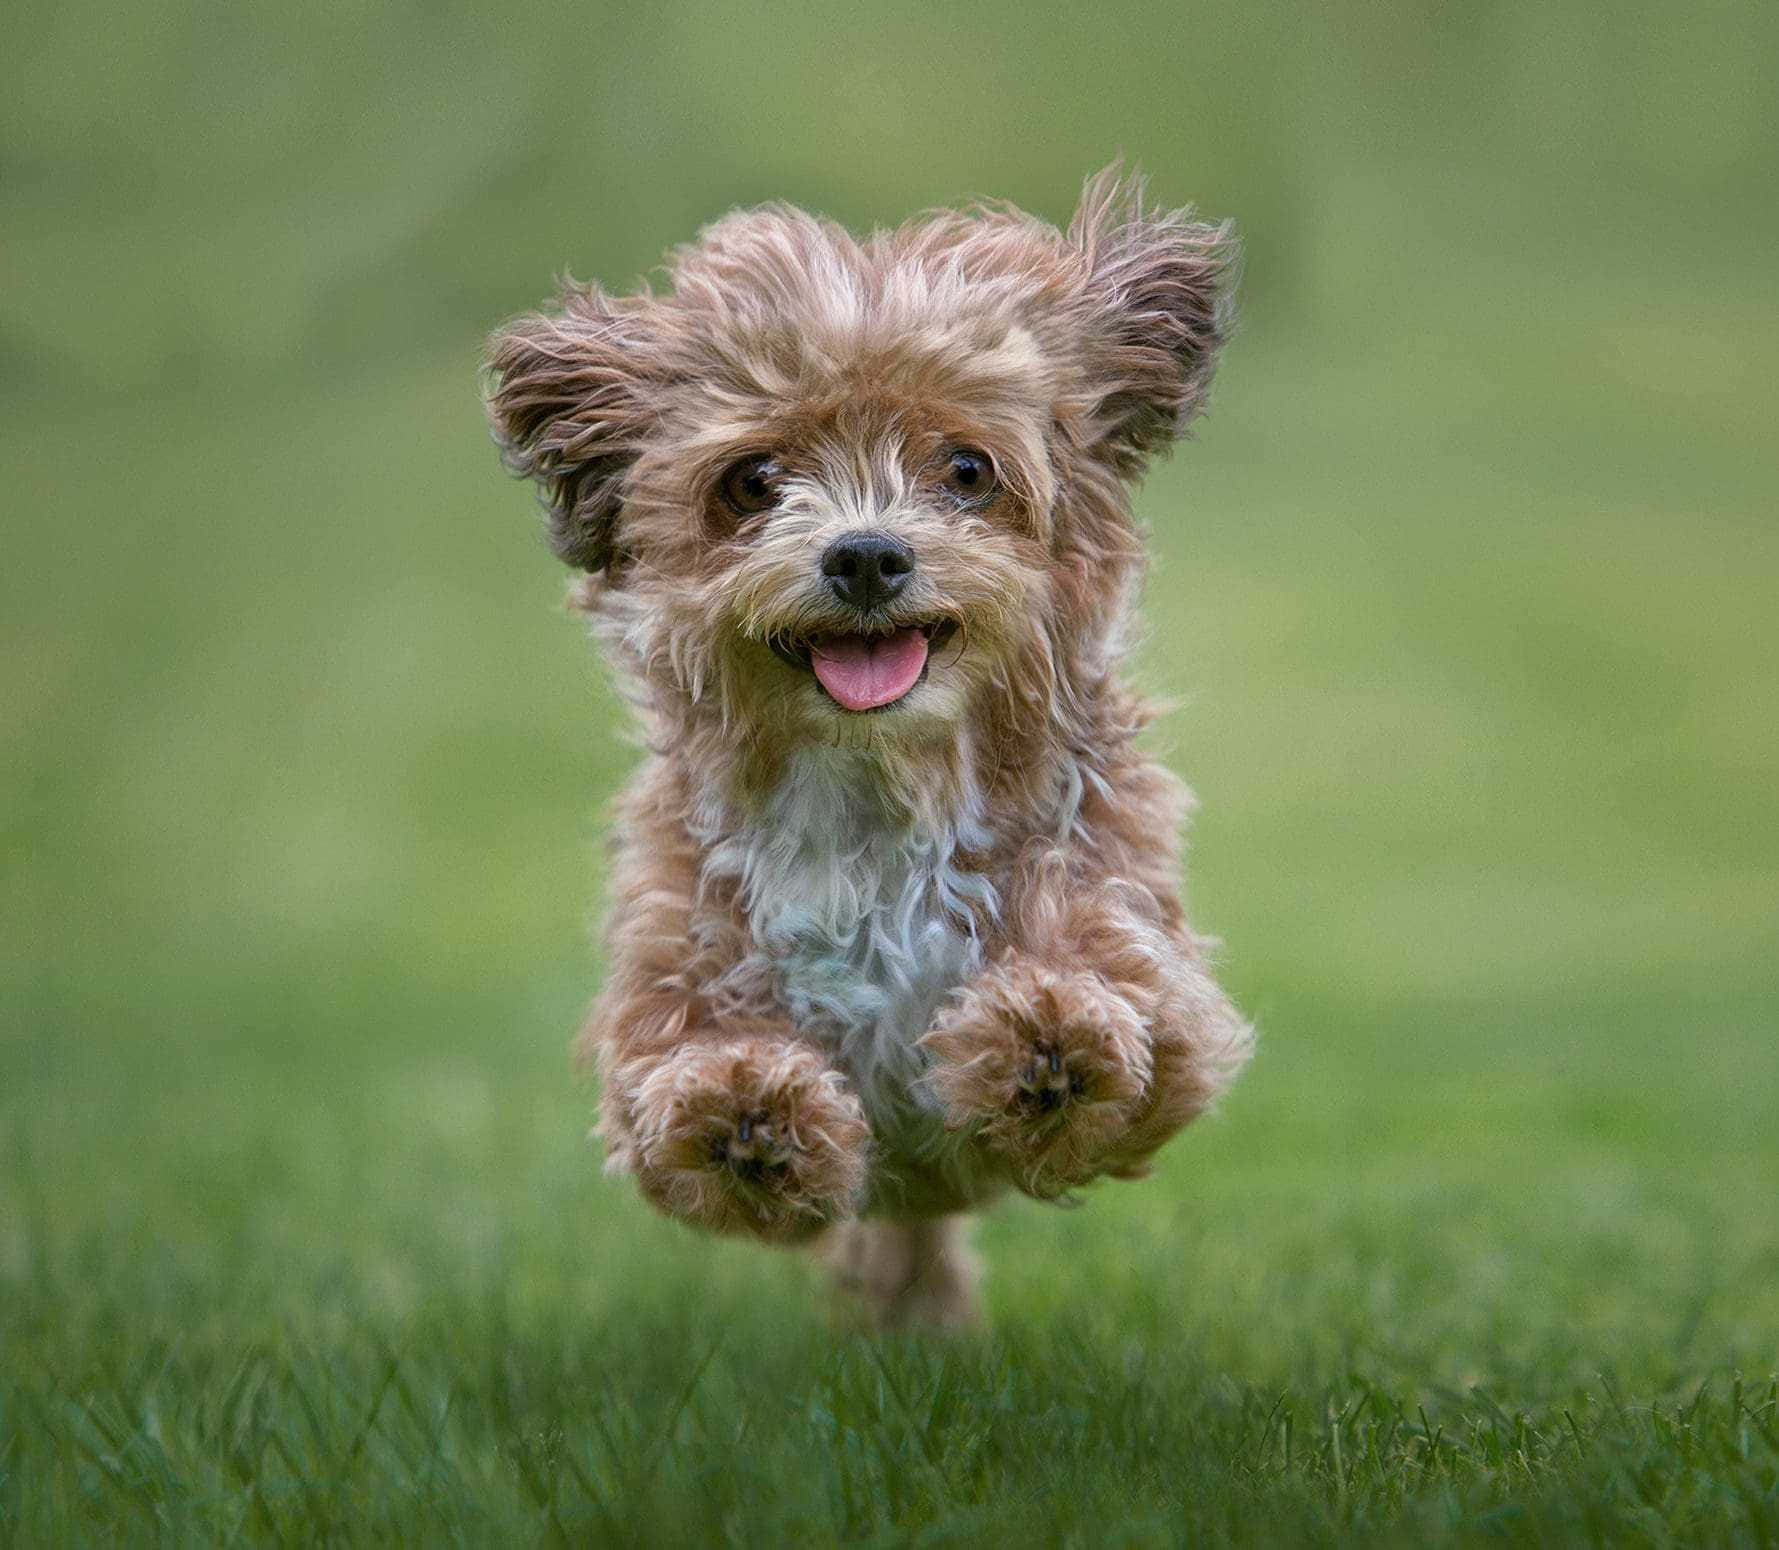 Playful Small Dog In Outdoor Setting Wallpaper